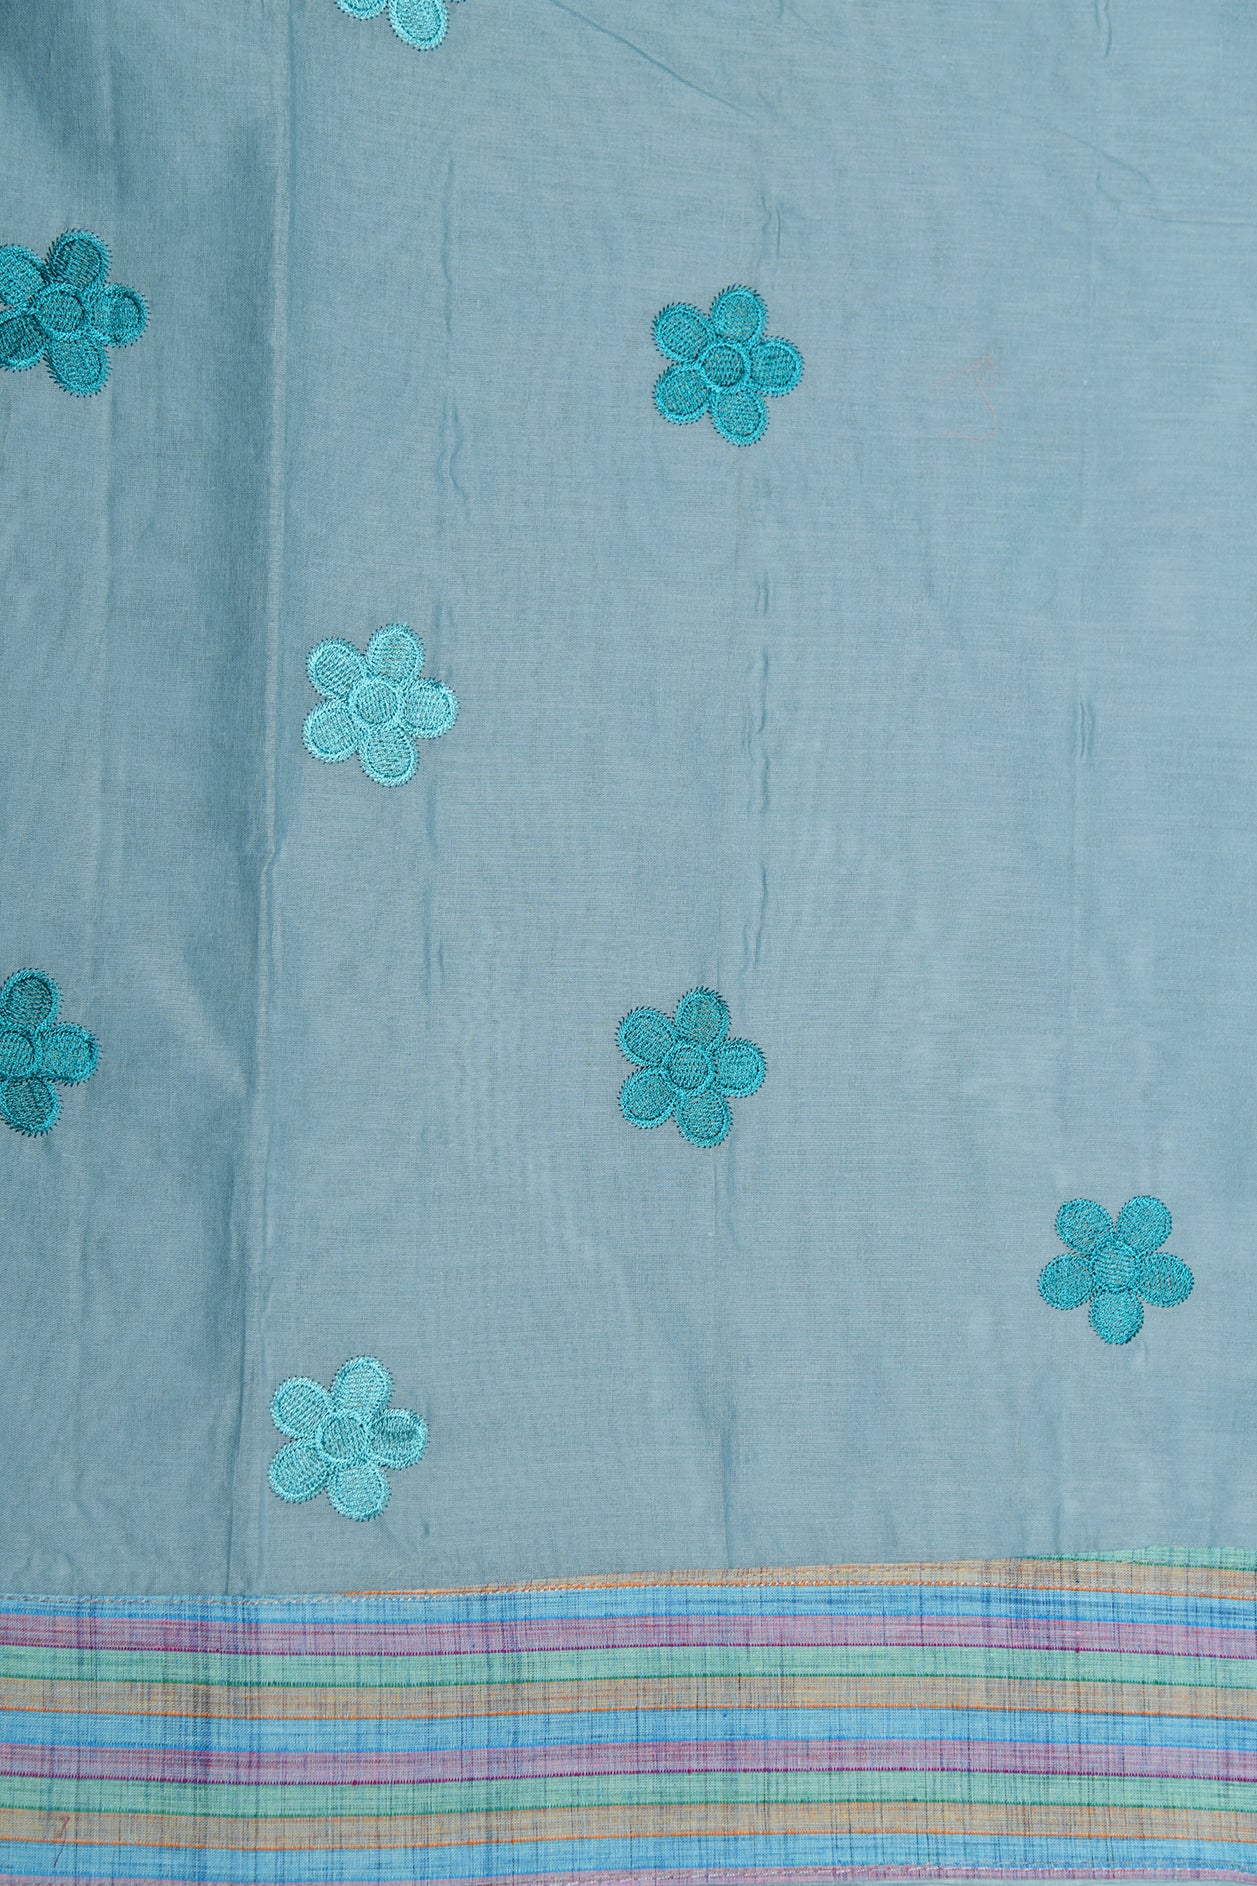 Pastel Stripes Border With Embroidered Floral Design Pastel Blue Ahmedabad Cotton Saree